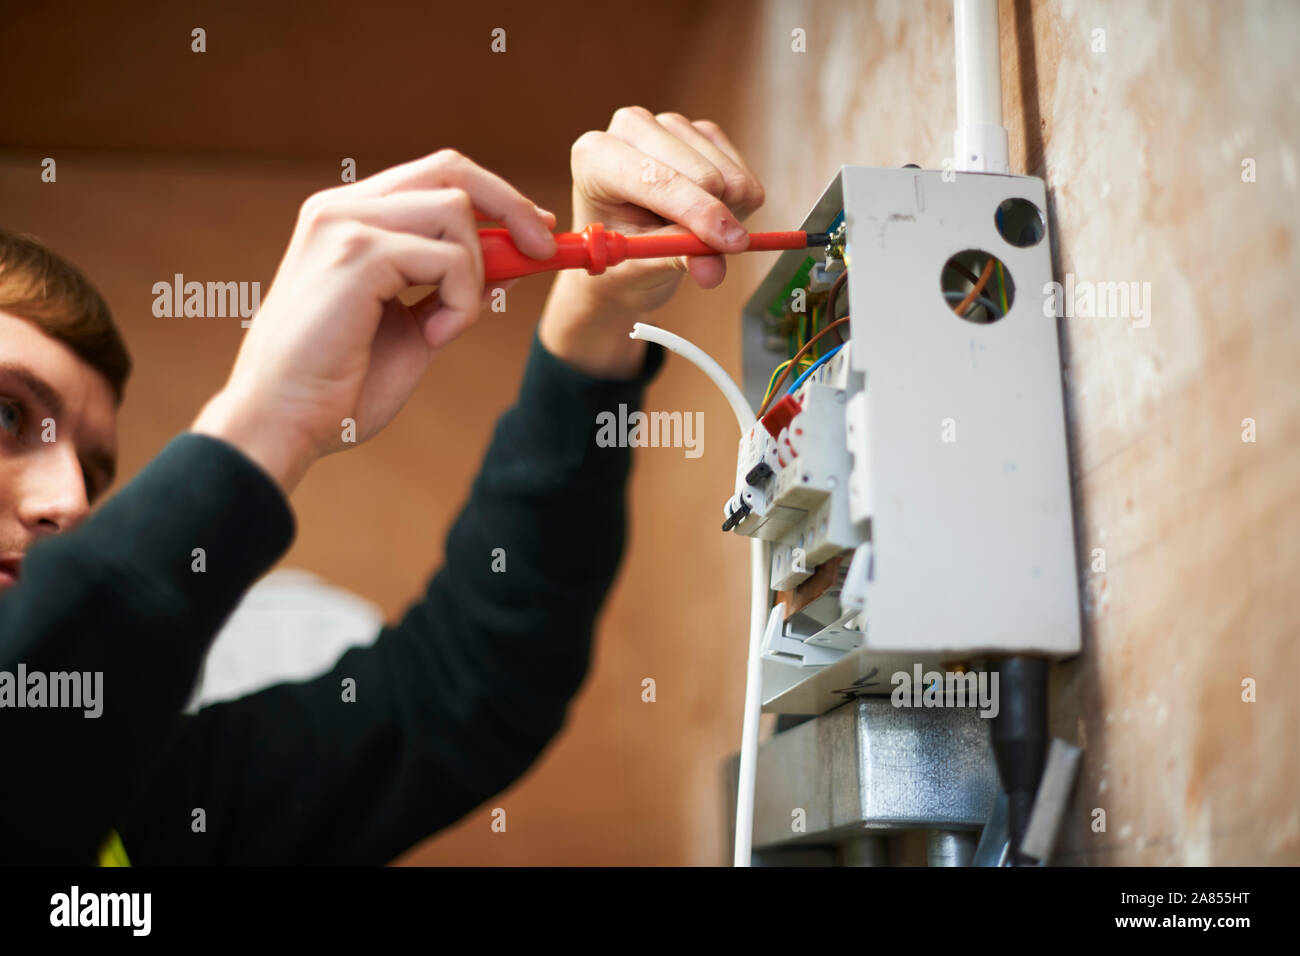 Male electrician using screwdriver, working at electric panel Stock Photo